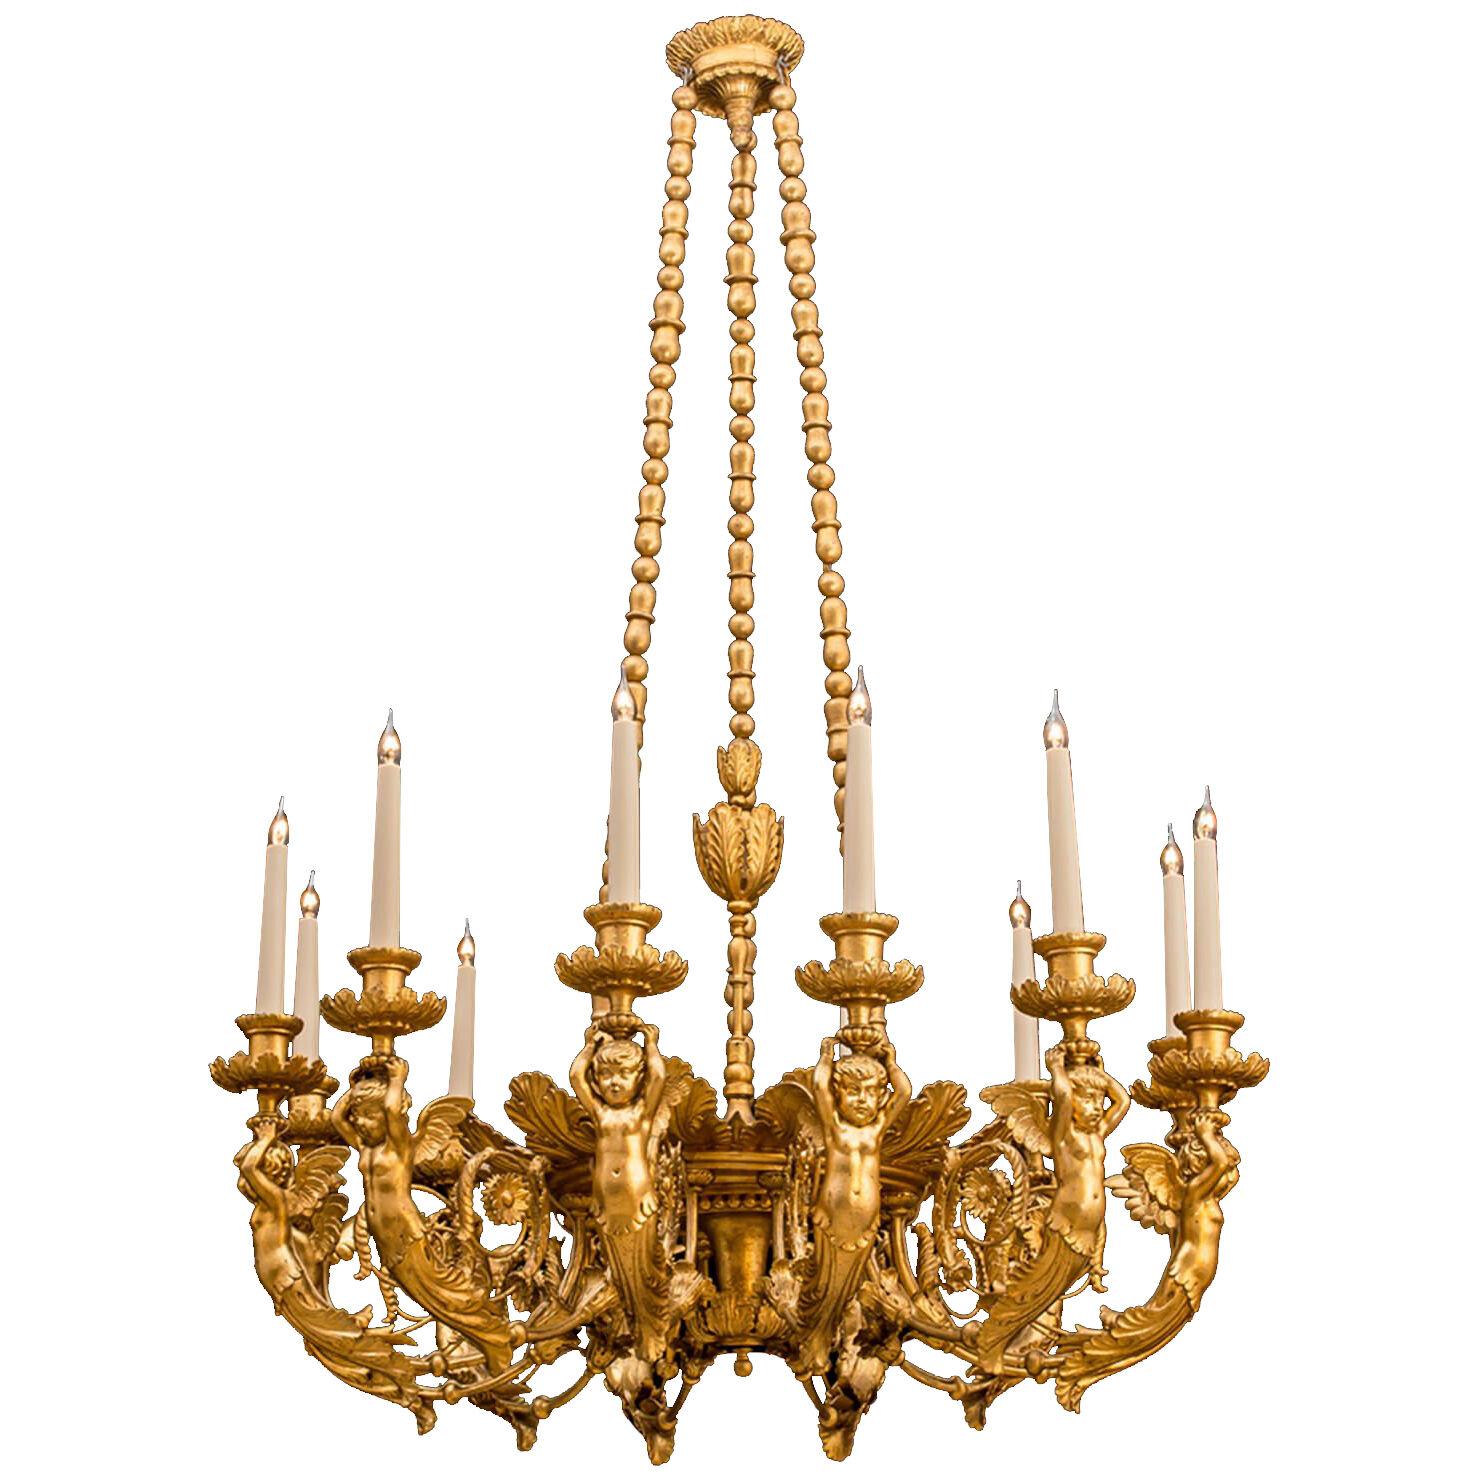 Rare 19th Century Italian Carved and Gilded 12-Light Chandelier